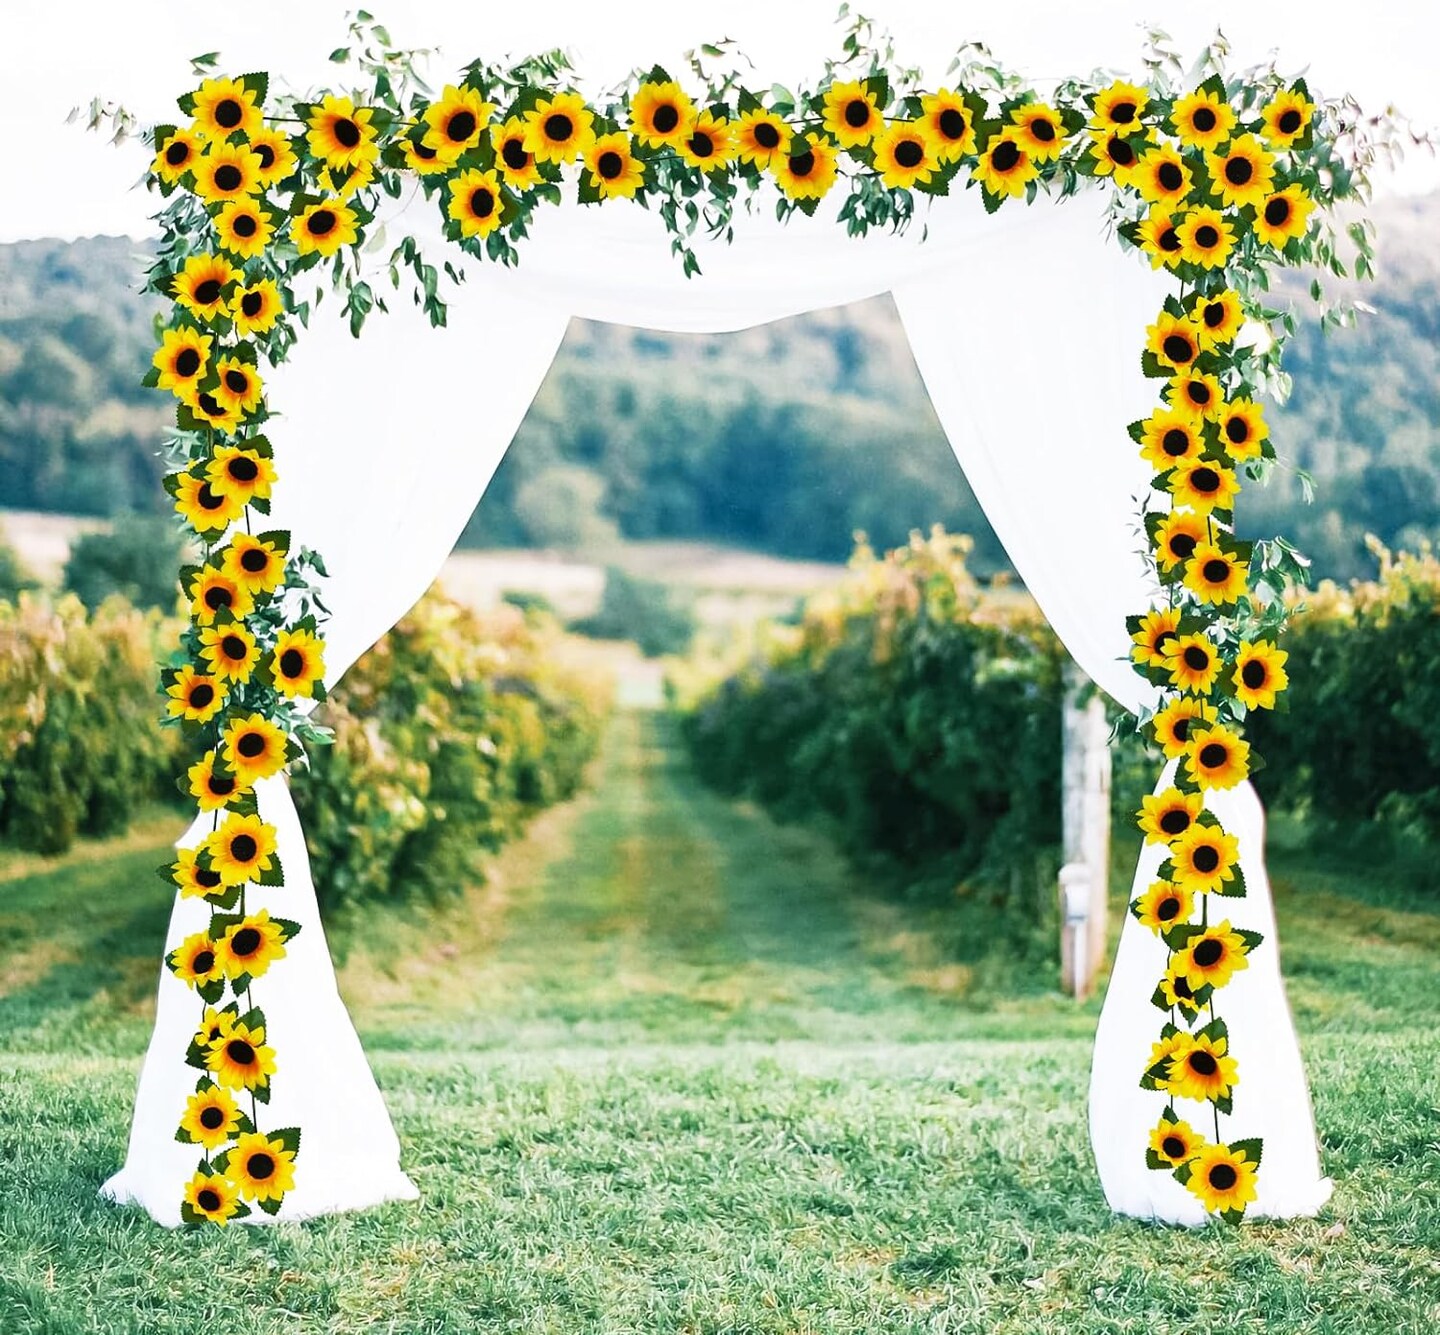 Three-piece 7.5-foot artificial sunflower garland with green leaves, perfect for home, kitchen, garden, wedding arch, bridal shower, baby shower, or outdoor decor. Made of silk flowers.